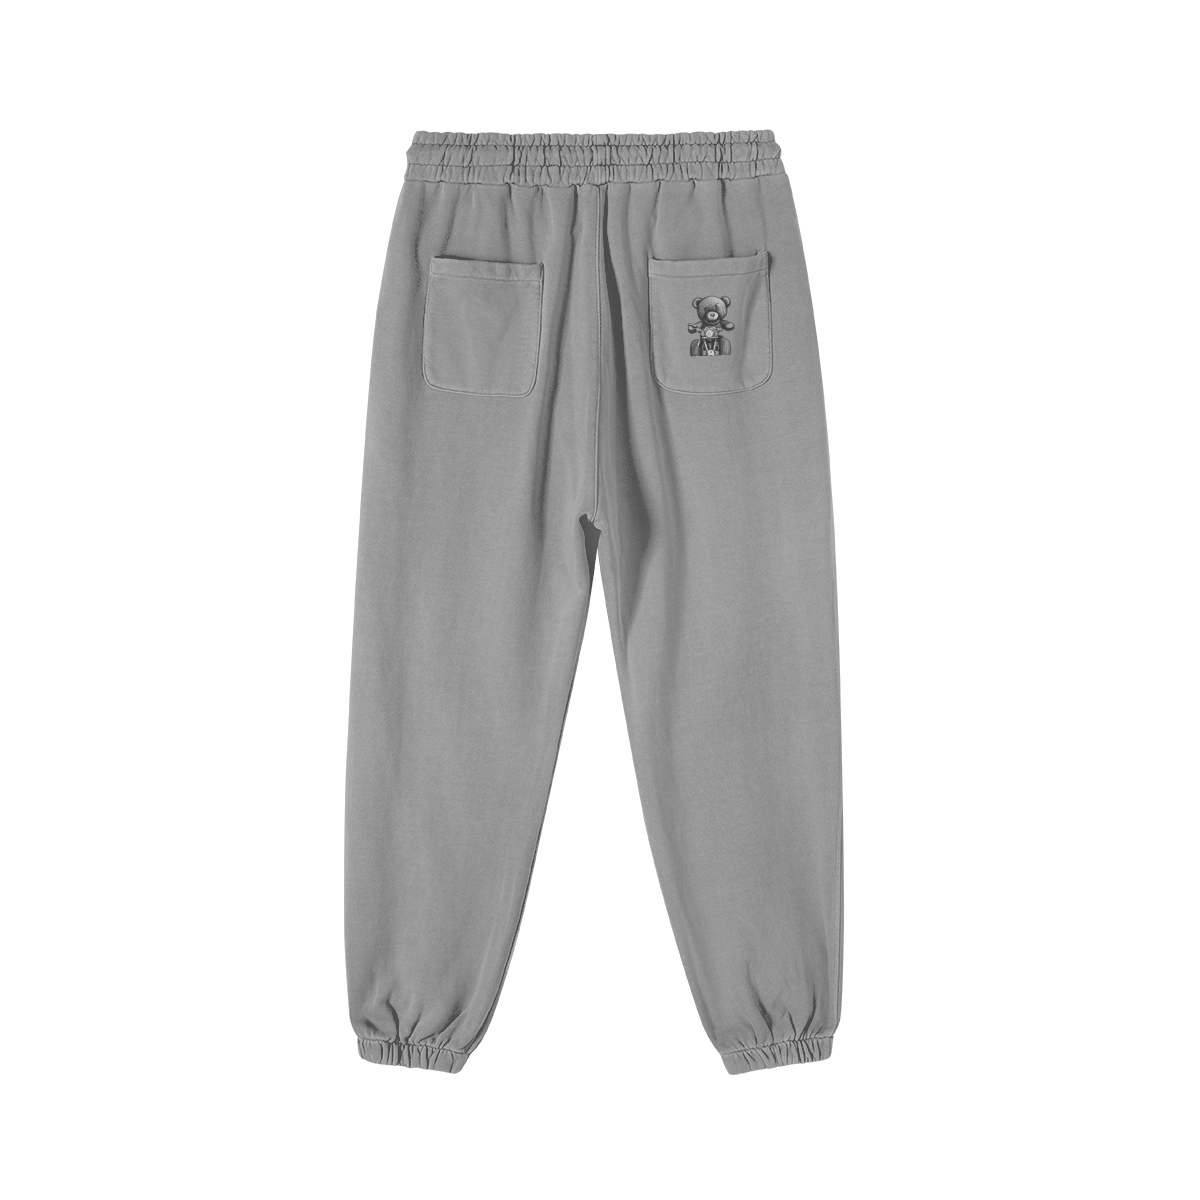 Carre Mens Automobile Baggy Sweat Pants | CoolSprings Galleria